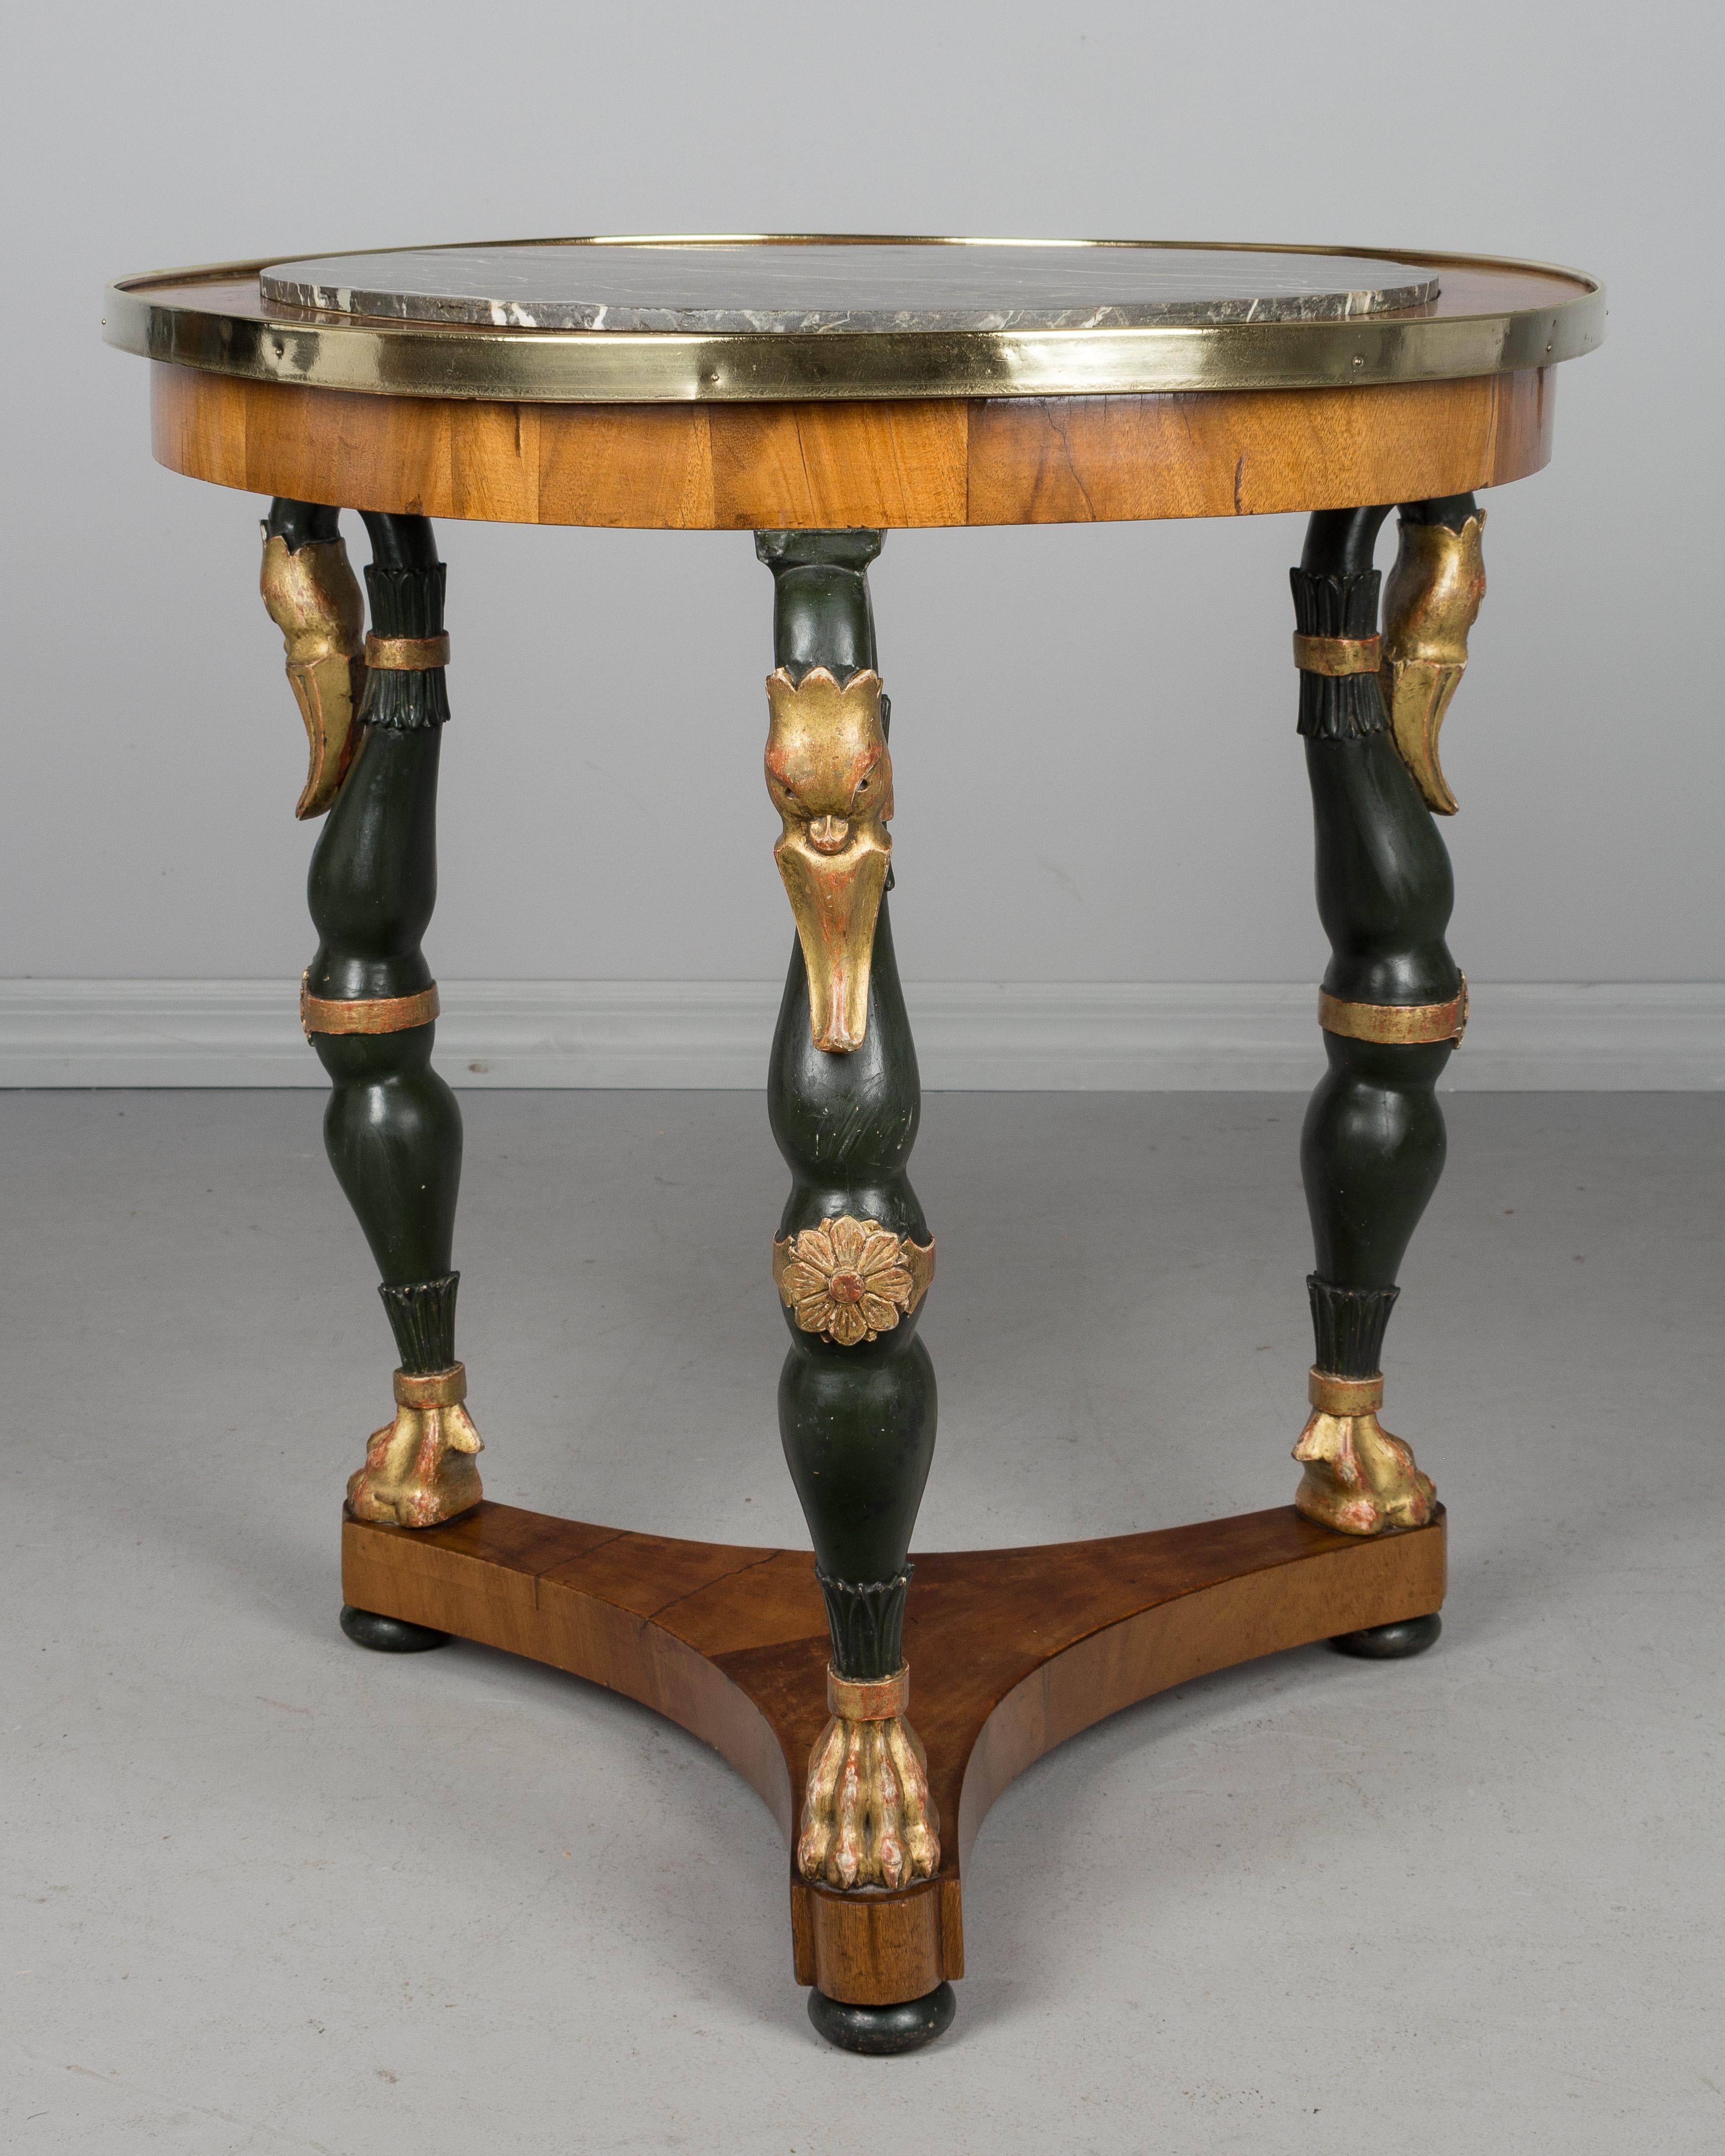 19th Century Charles X Walnut Guéridon or Centre Table In Good Condition For Sale In Winter Park, FL